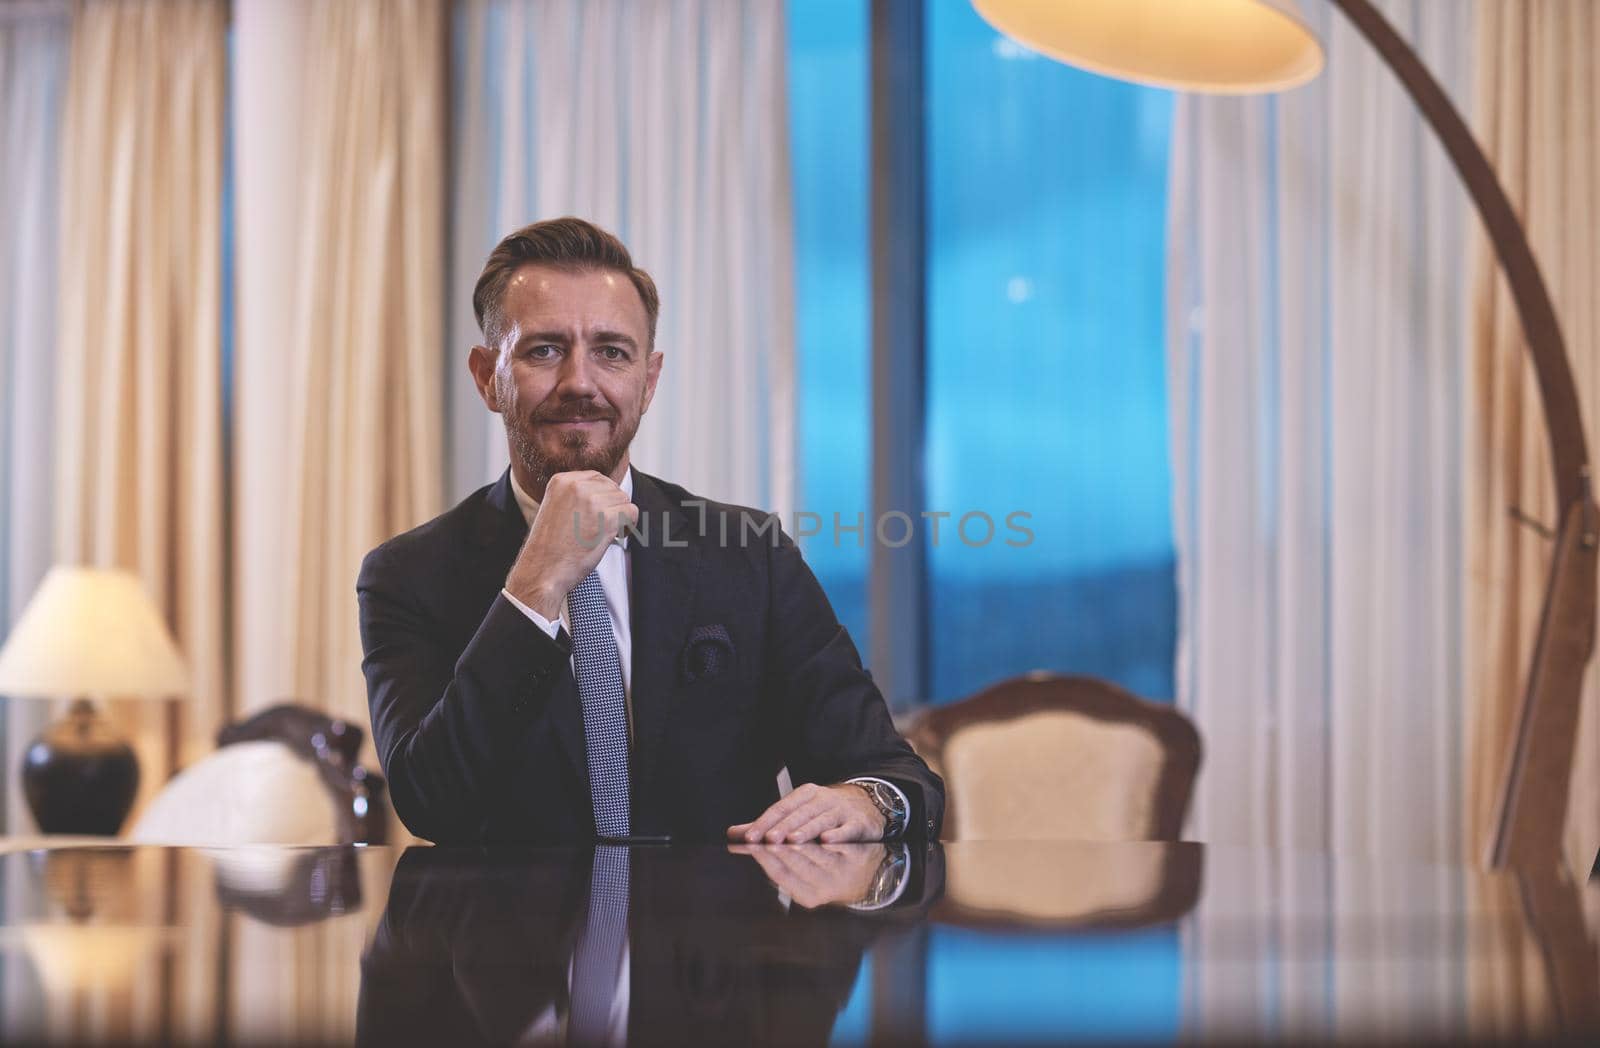 Senior executive businessman at luxury corporate workspace. Portrait of smiling ceo at modern office in stylish suit